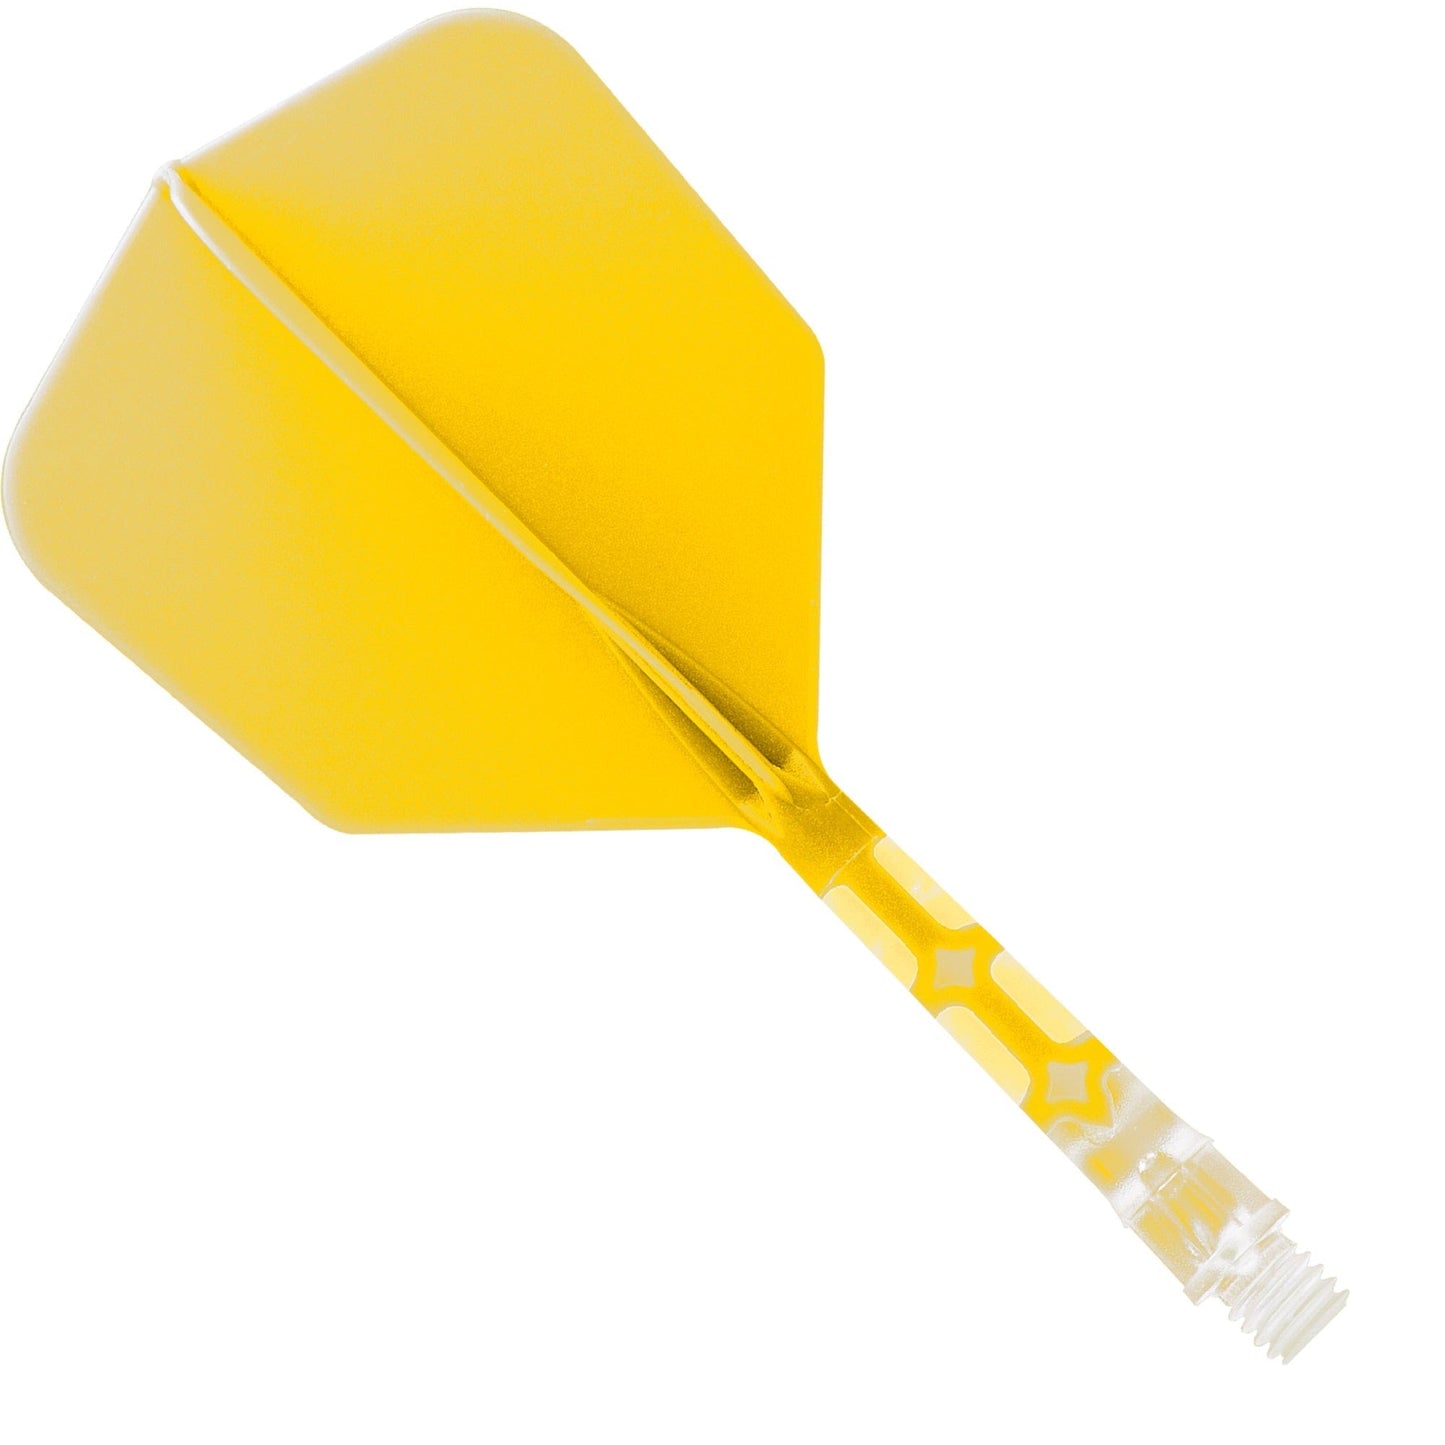 Cuesoul Rost T19 Integrated Dart Shaft and Flights - Big Wing - Clear with Yellow Flight Medium